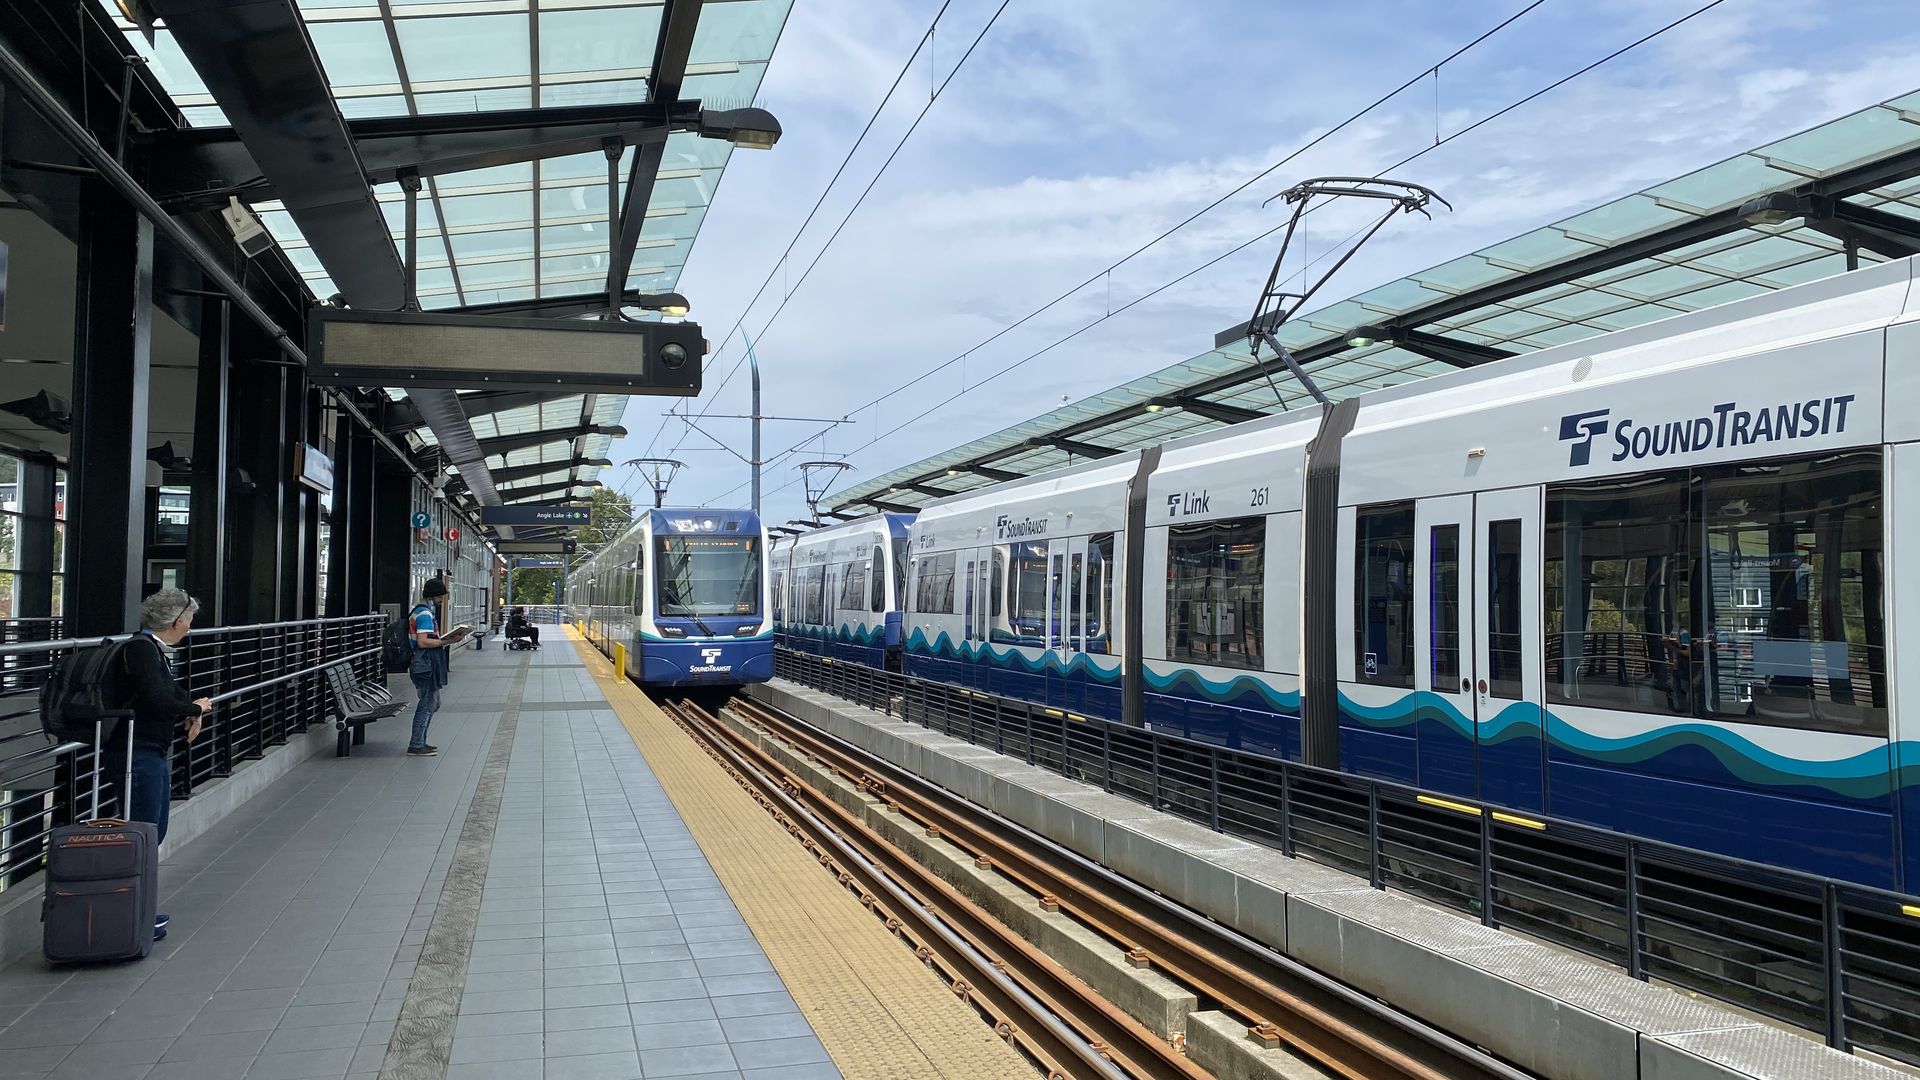 A Sound transit train goes by in one direction while another comes in the other direction at a light rail platform. 